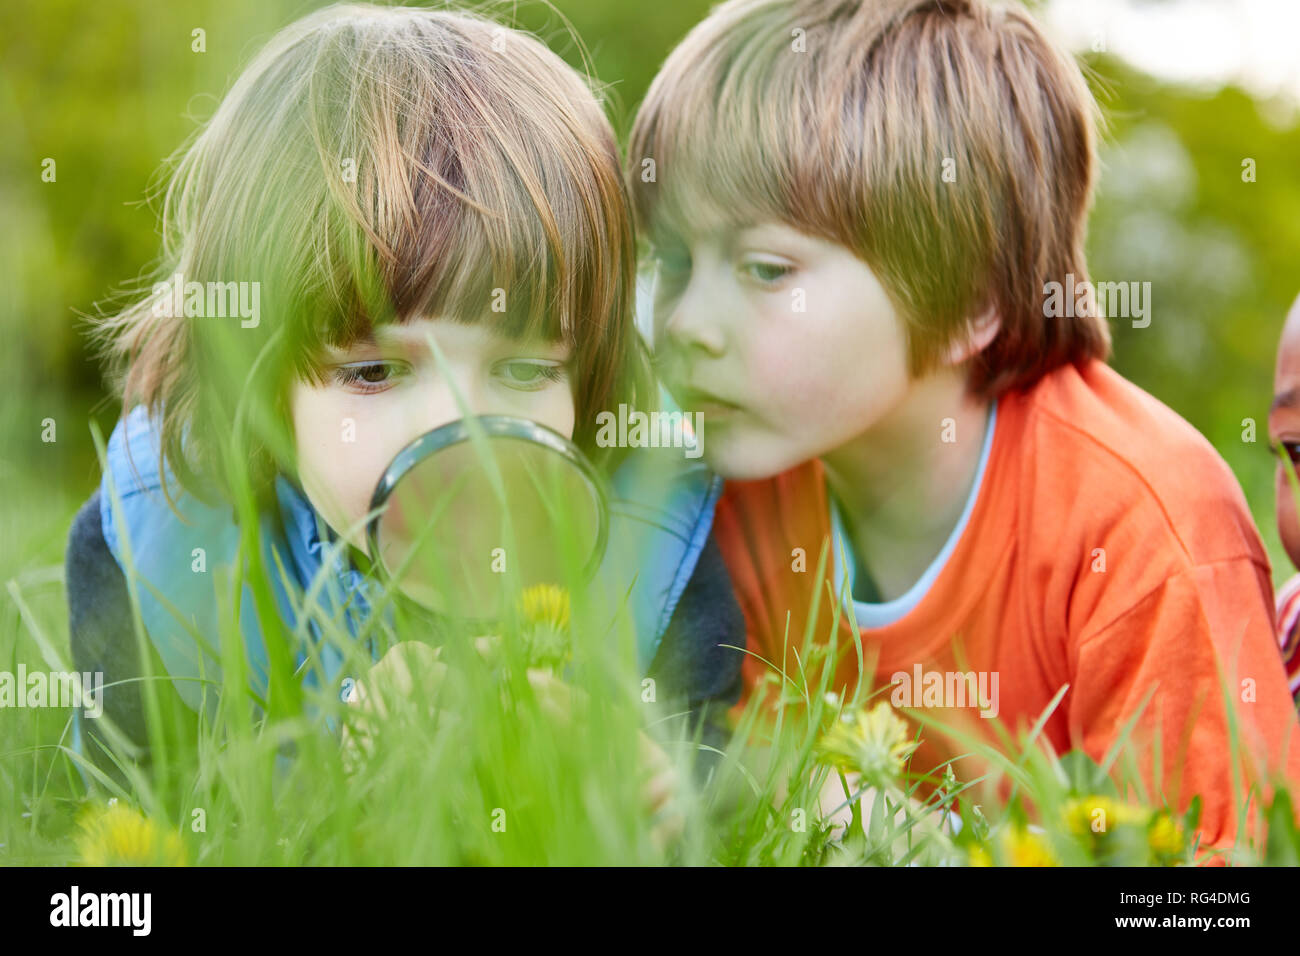 Three children as researchers and detectives look at nature and the environment through a magnifying glass Stock Photo